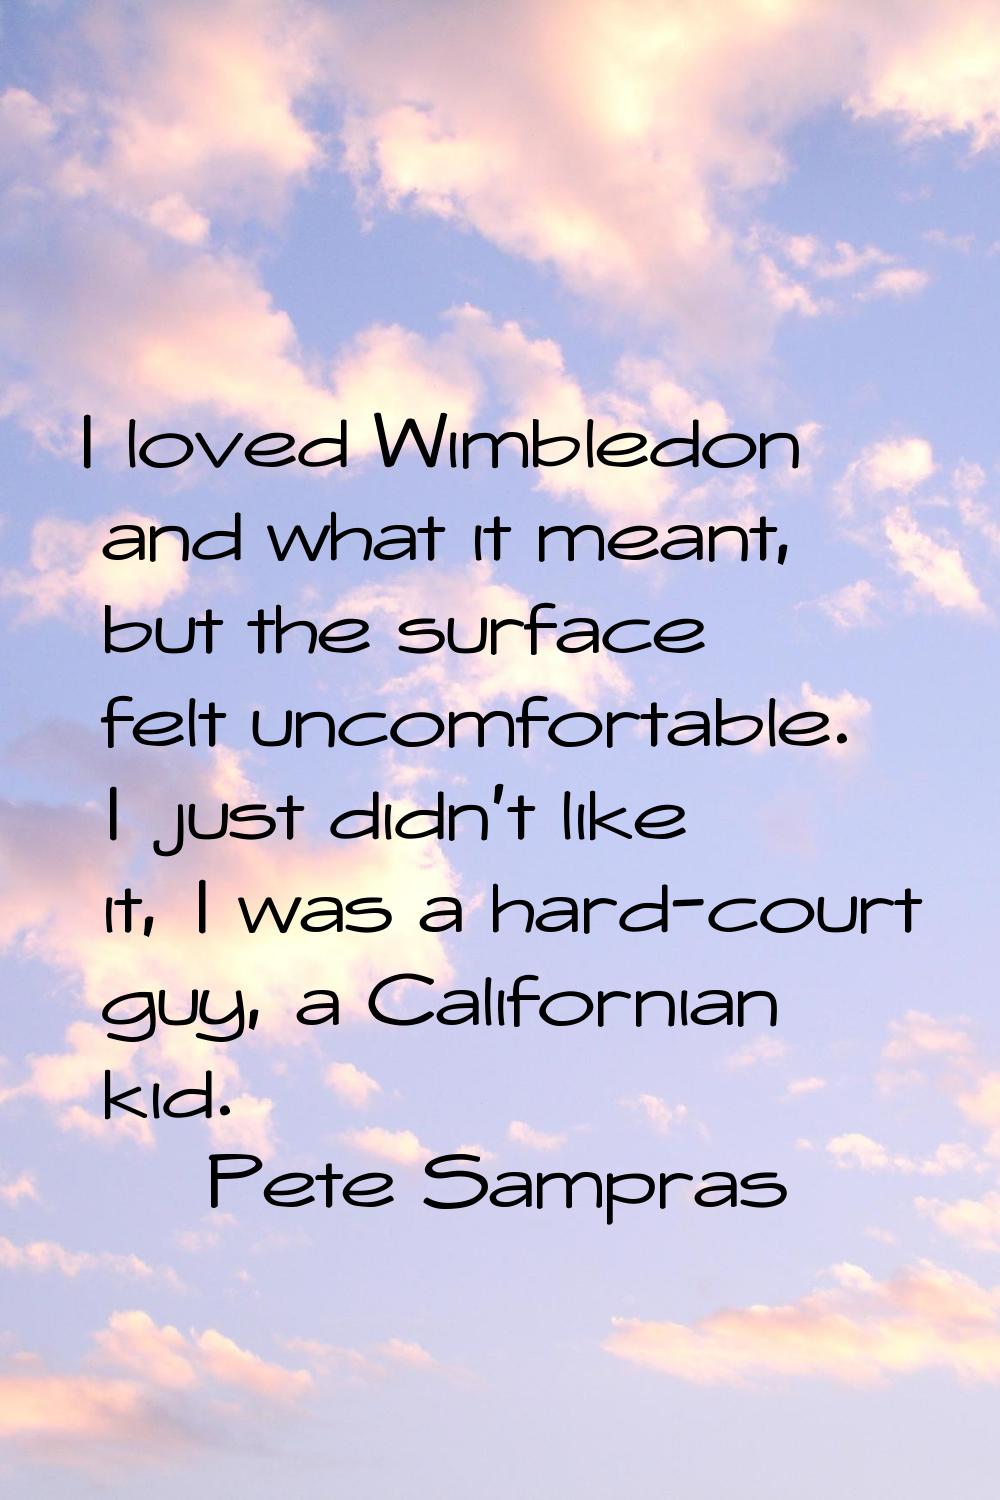 I loved Wimbledon and what it meant, but the surface felt uncomfortable. I just didn't like it, I w